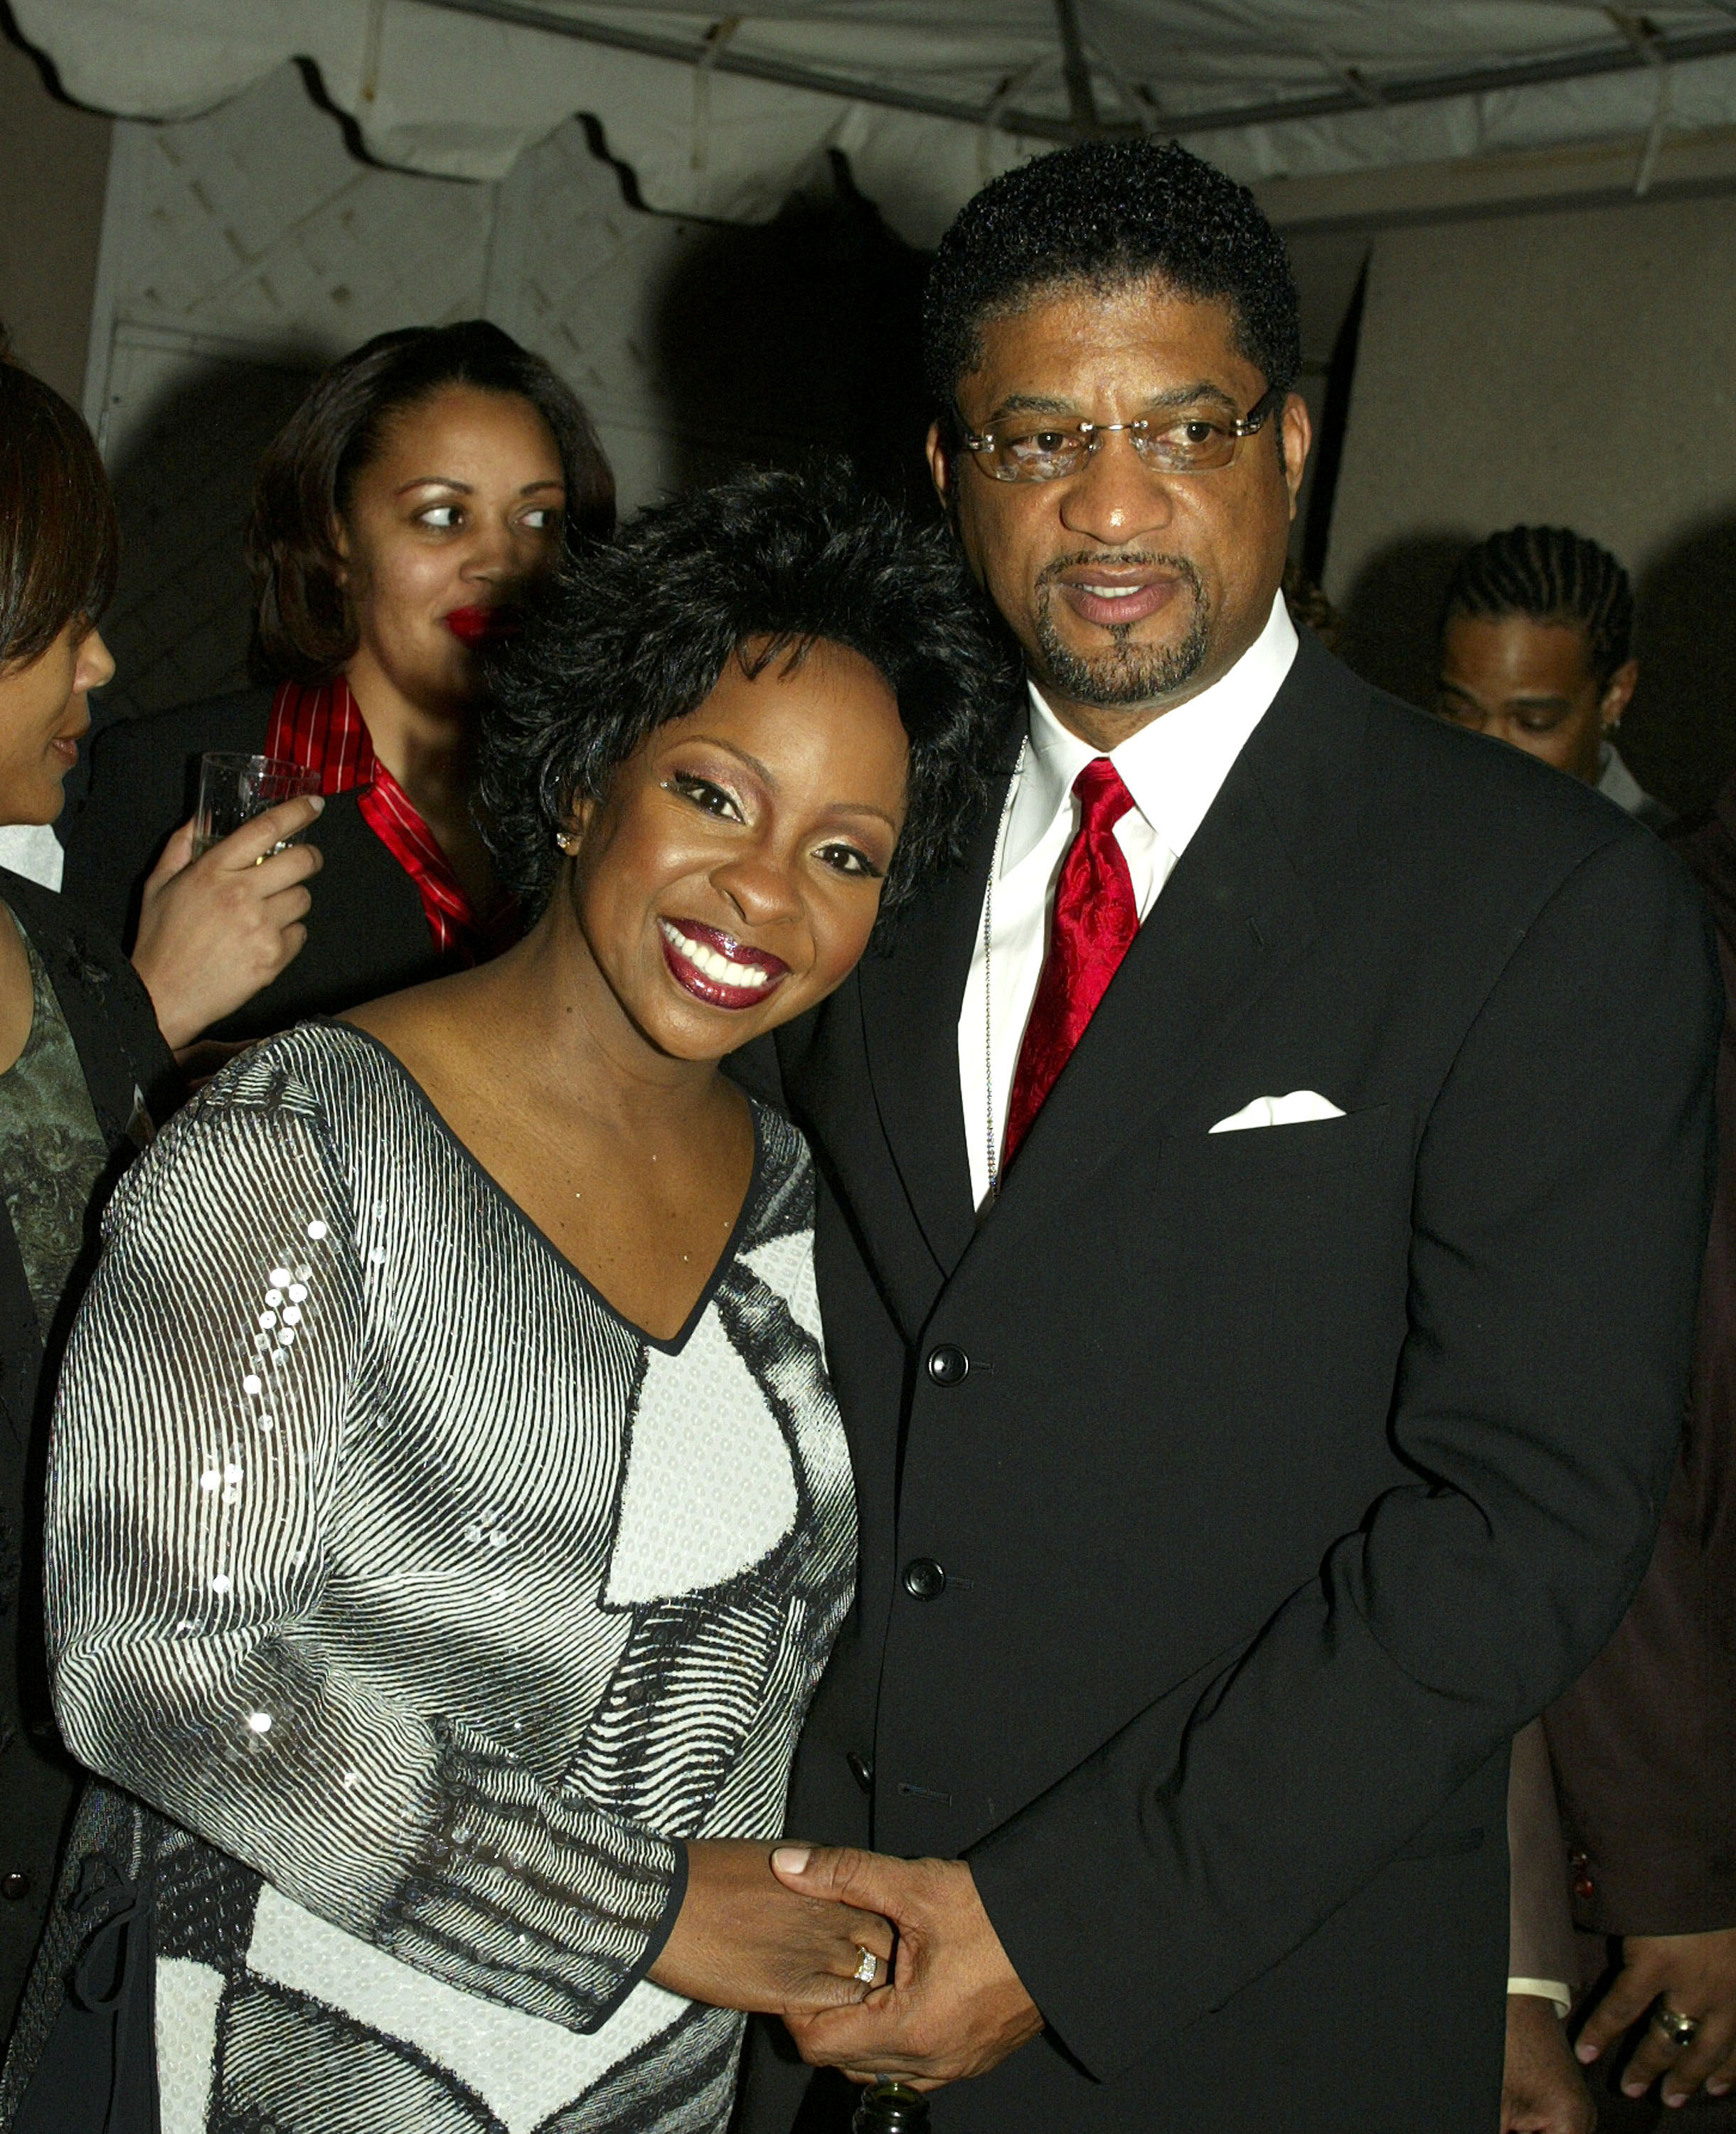 Gladys Knight and her husband William McDowell pose backstage after her performance at the Universal Amphitheater on February 14, 2003, in Los Angeles, California | Source: Getty Images